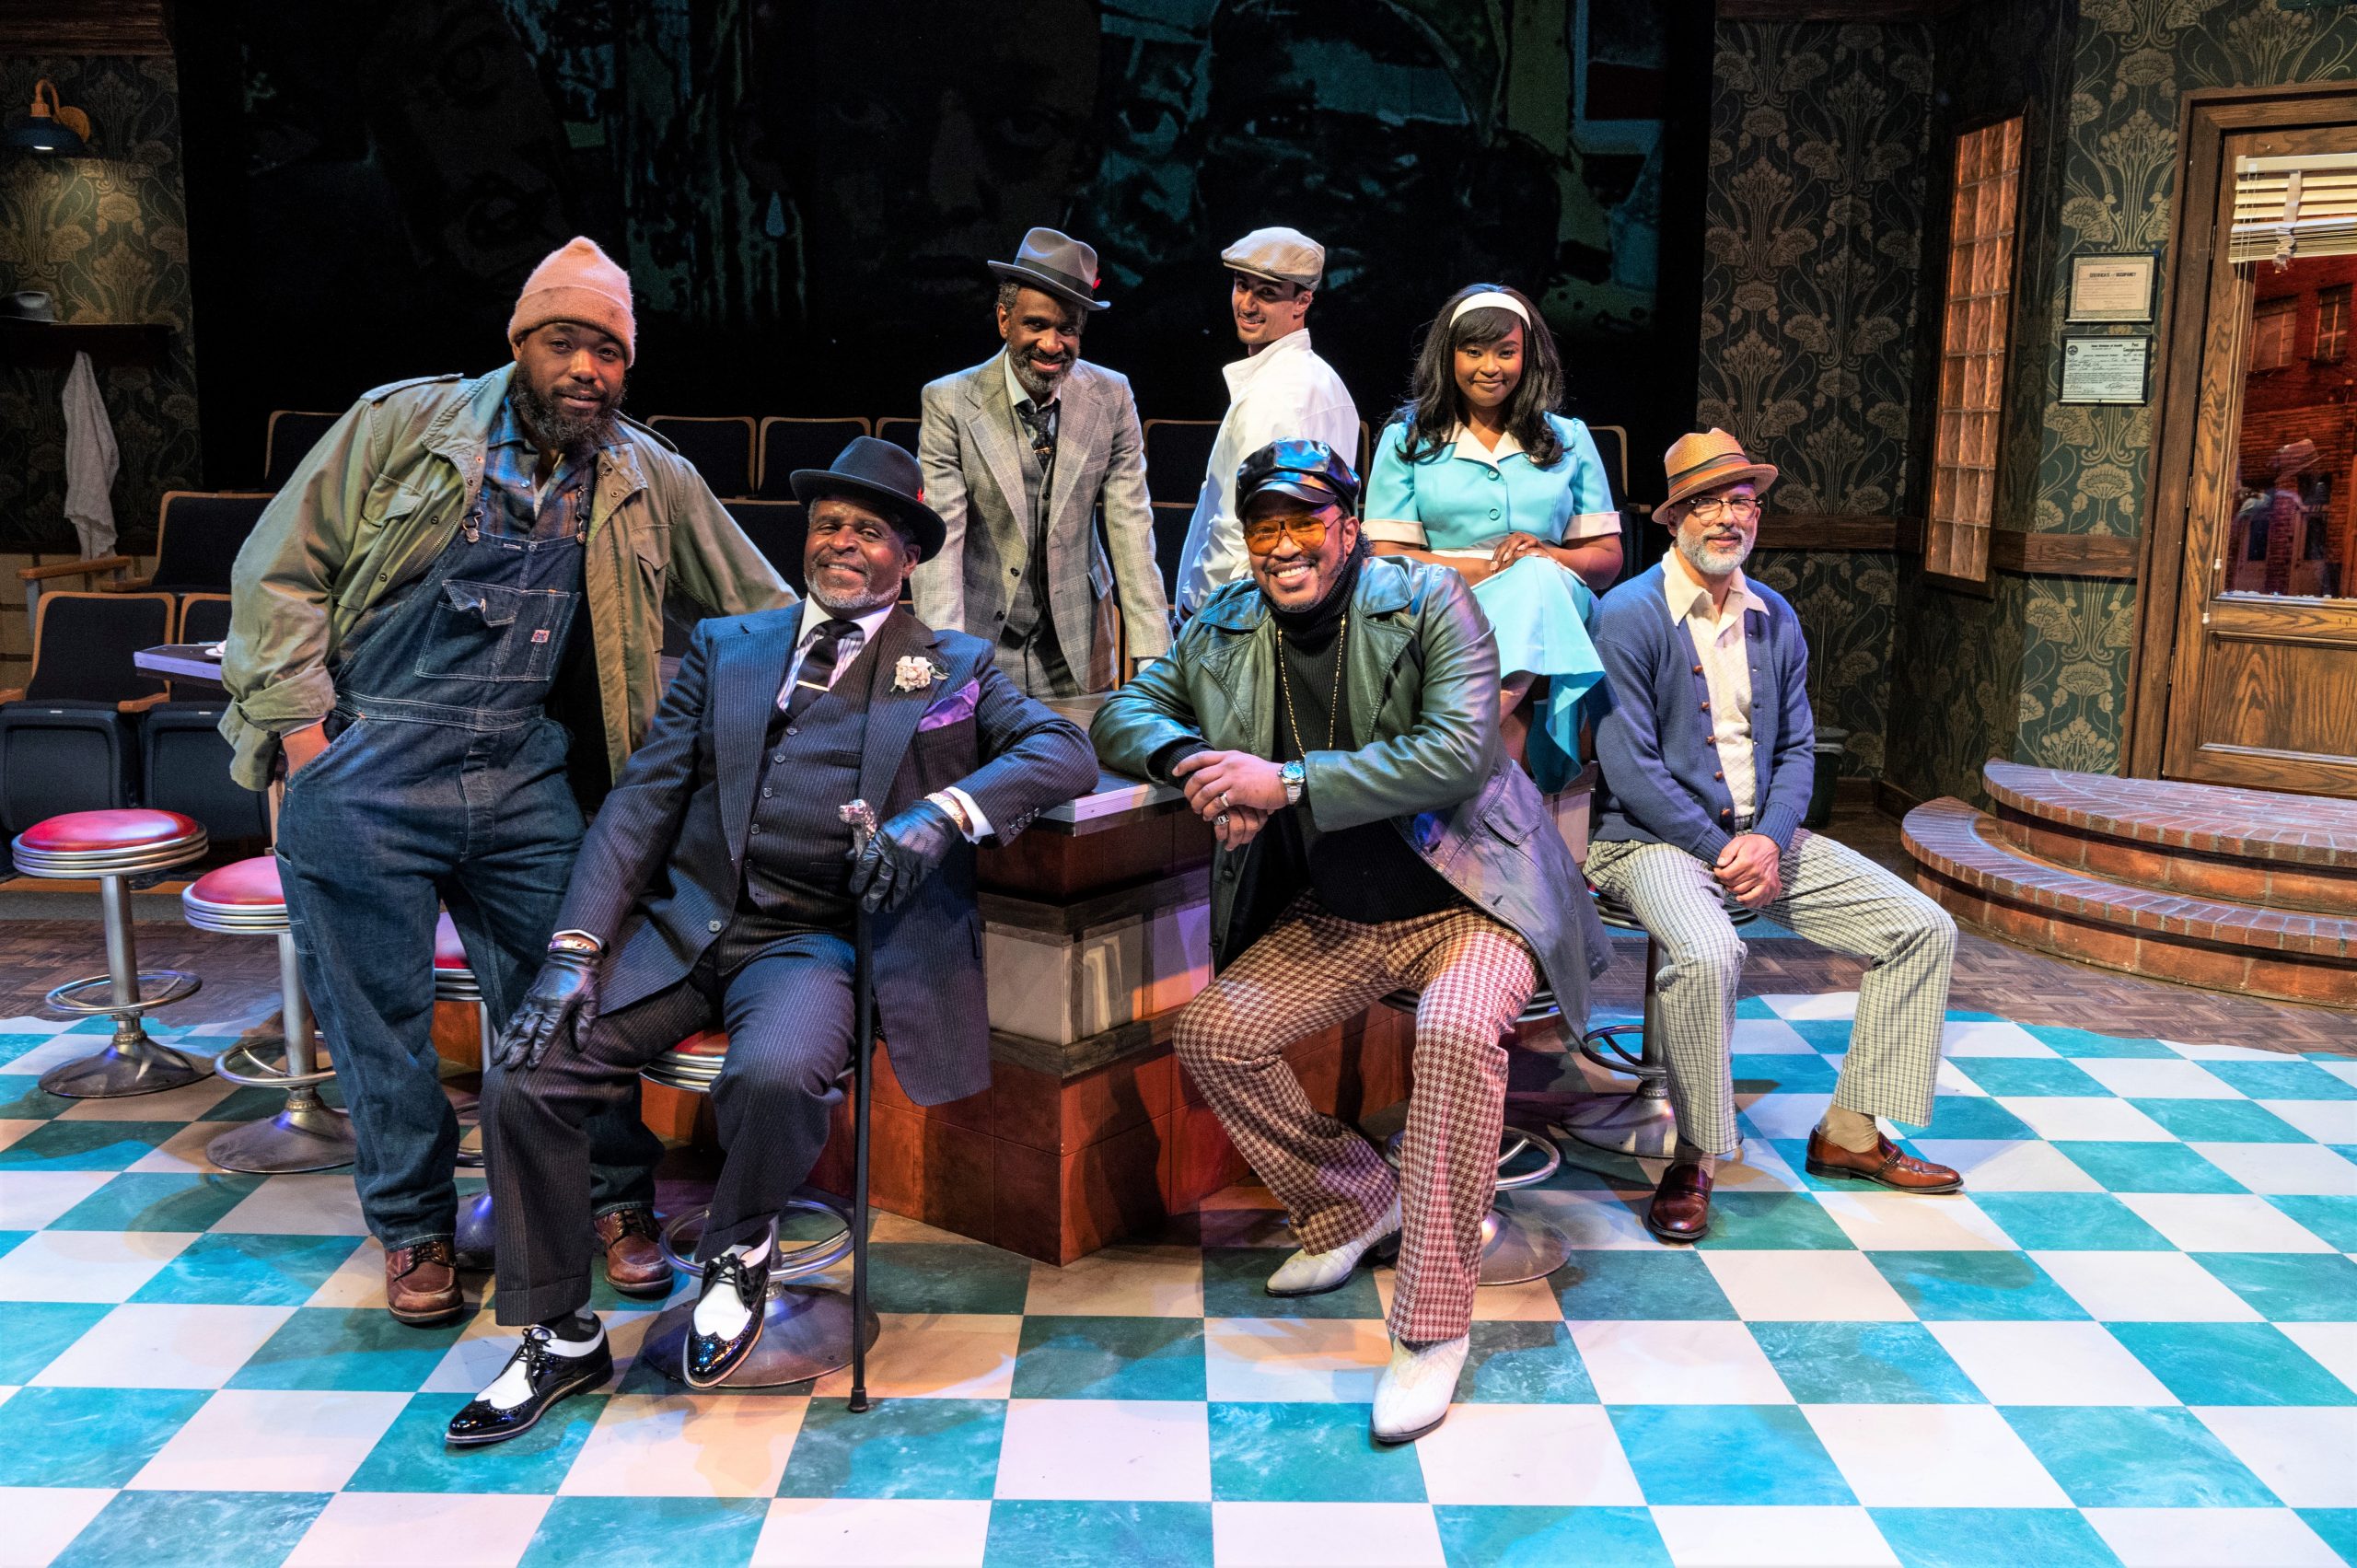 The cast of 'Two Trains Running,' (l. to r.): Hambone (Ananias J Dixon), West (Wali Jamal), Memphis (Brian D. Coats), Sterling (standing, Brenden Peifer), Wolf (Brian Starks), Risa (Melessie Clark), and Holloway (Justin Emeka).